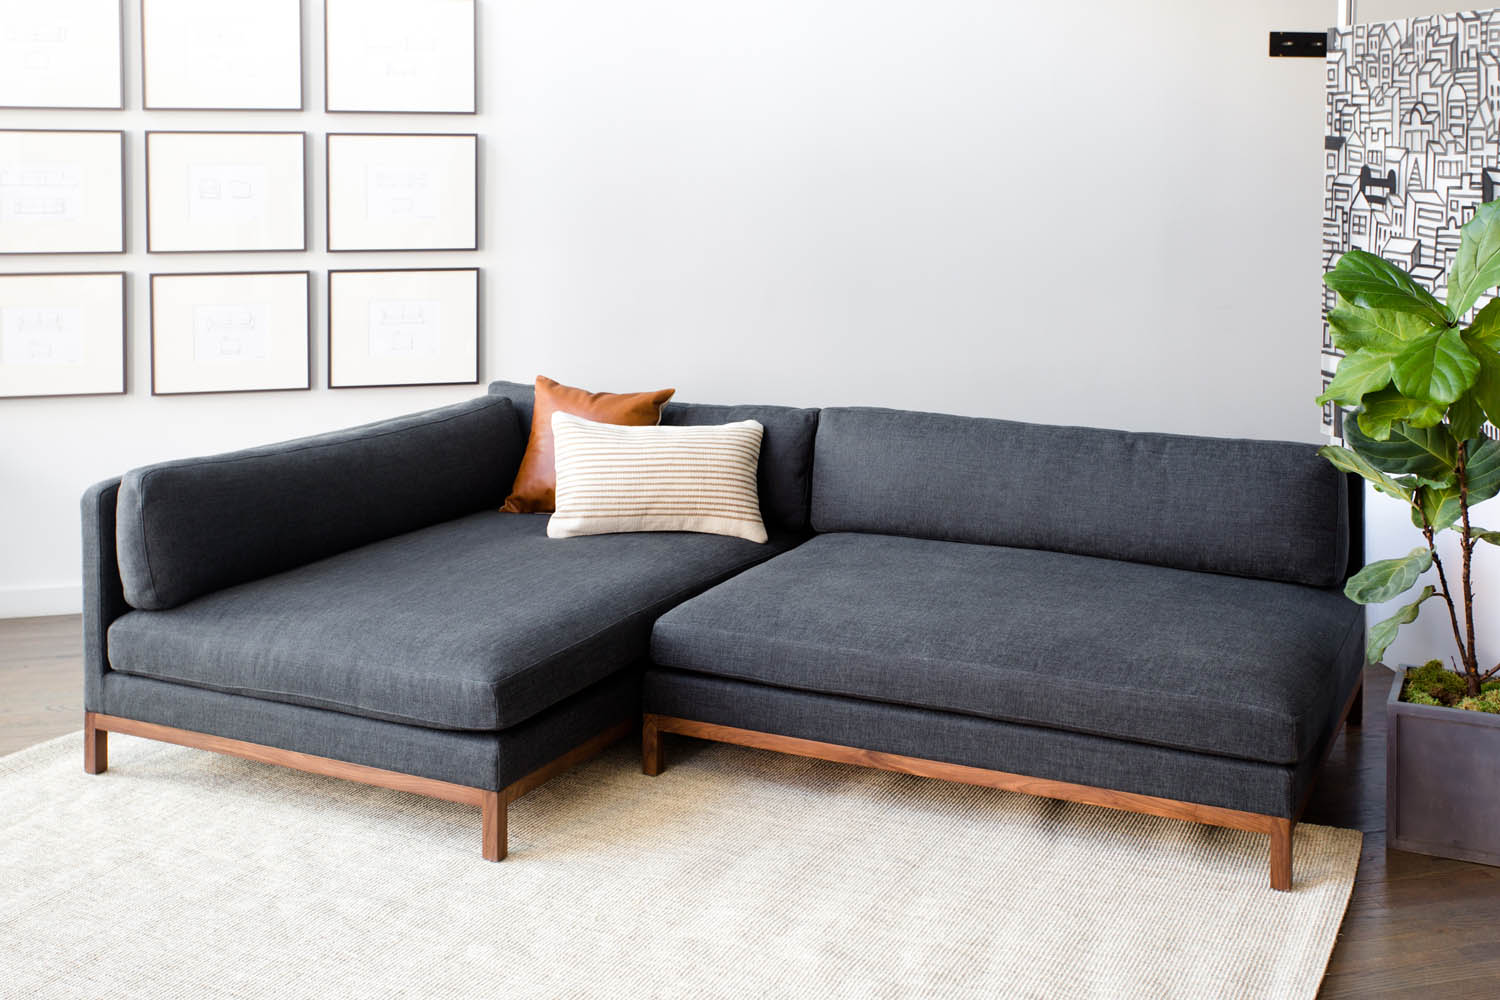 How To Buy a Sofa Online | Rue
